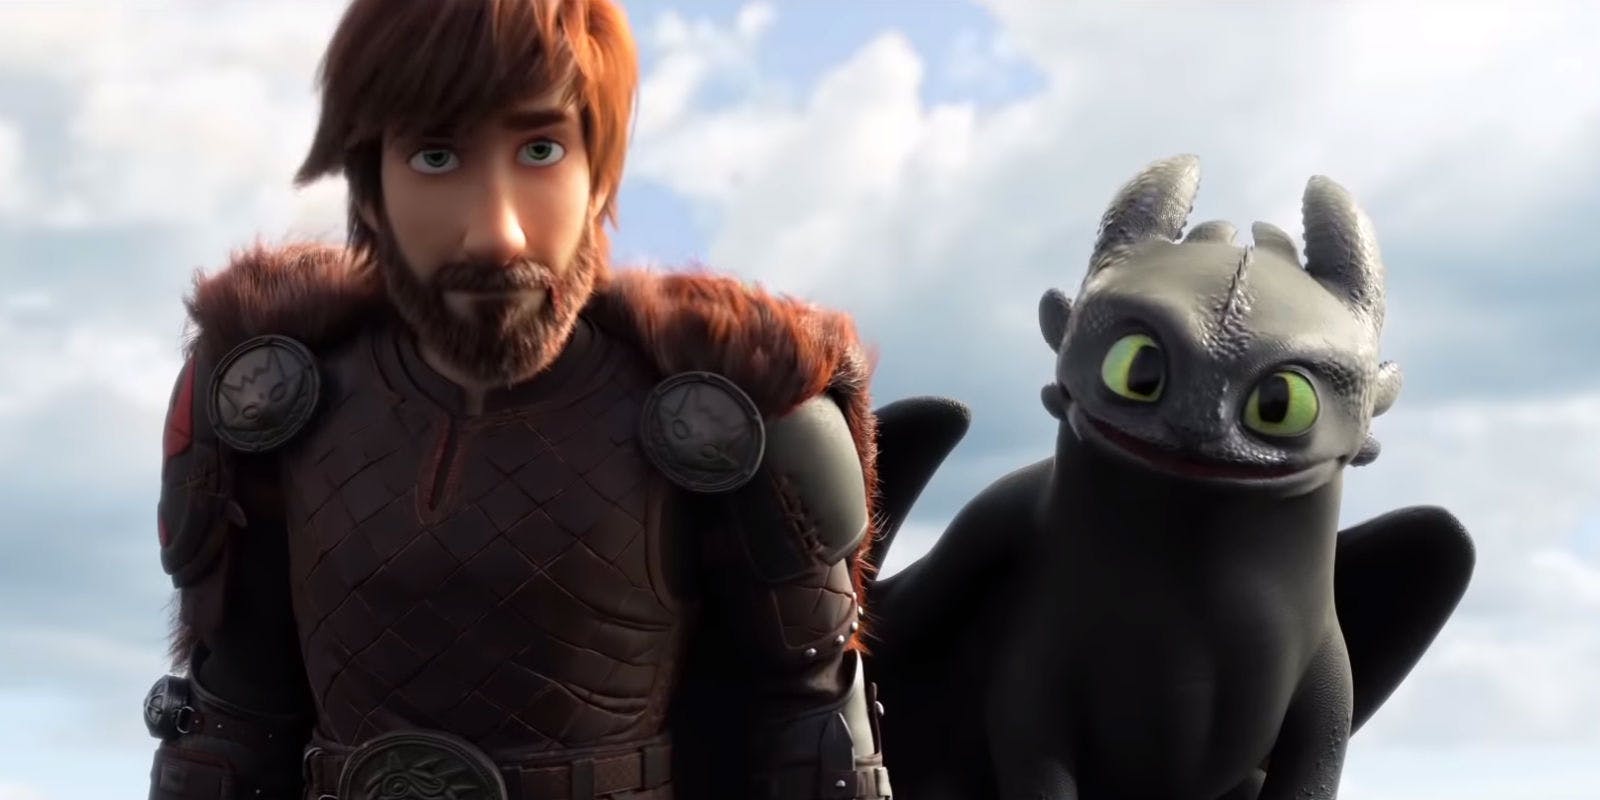 How to Train Your Dragon 3 Review: The Loves We Lost